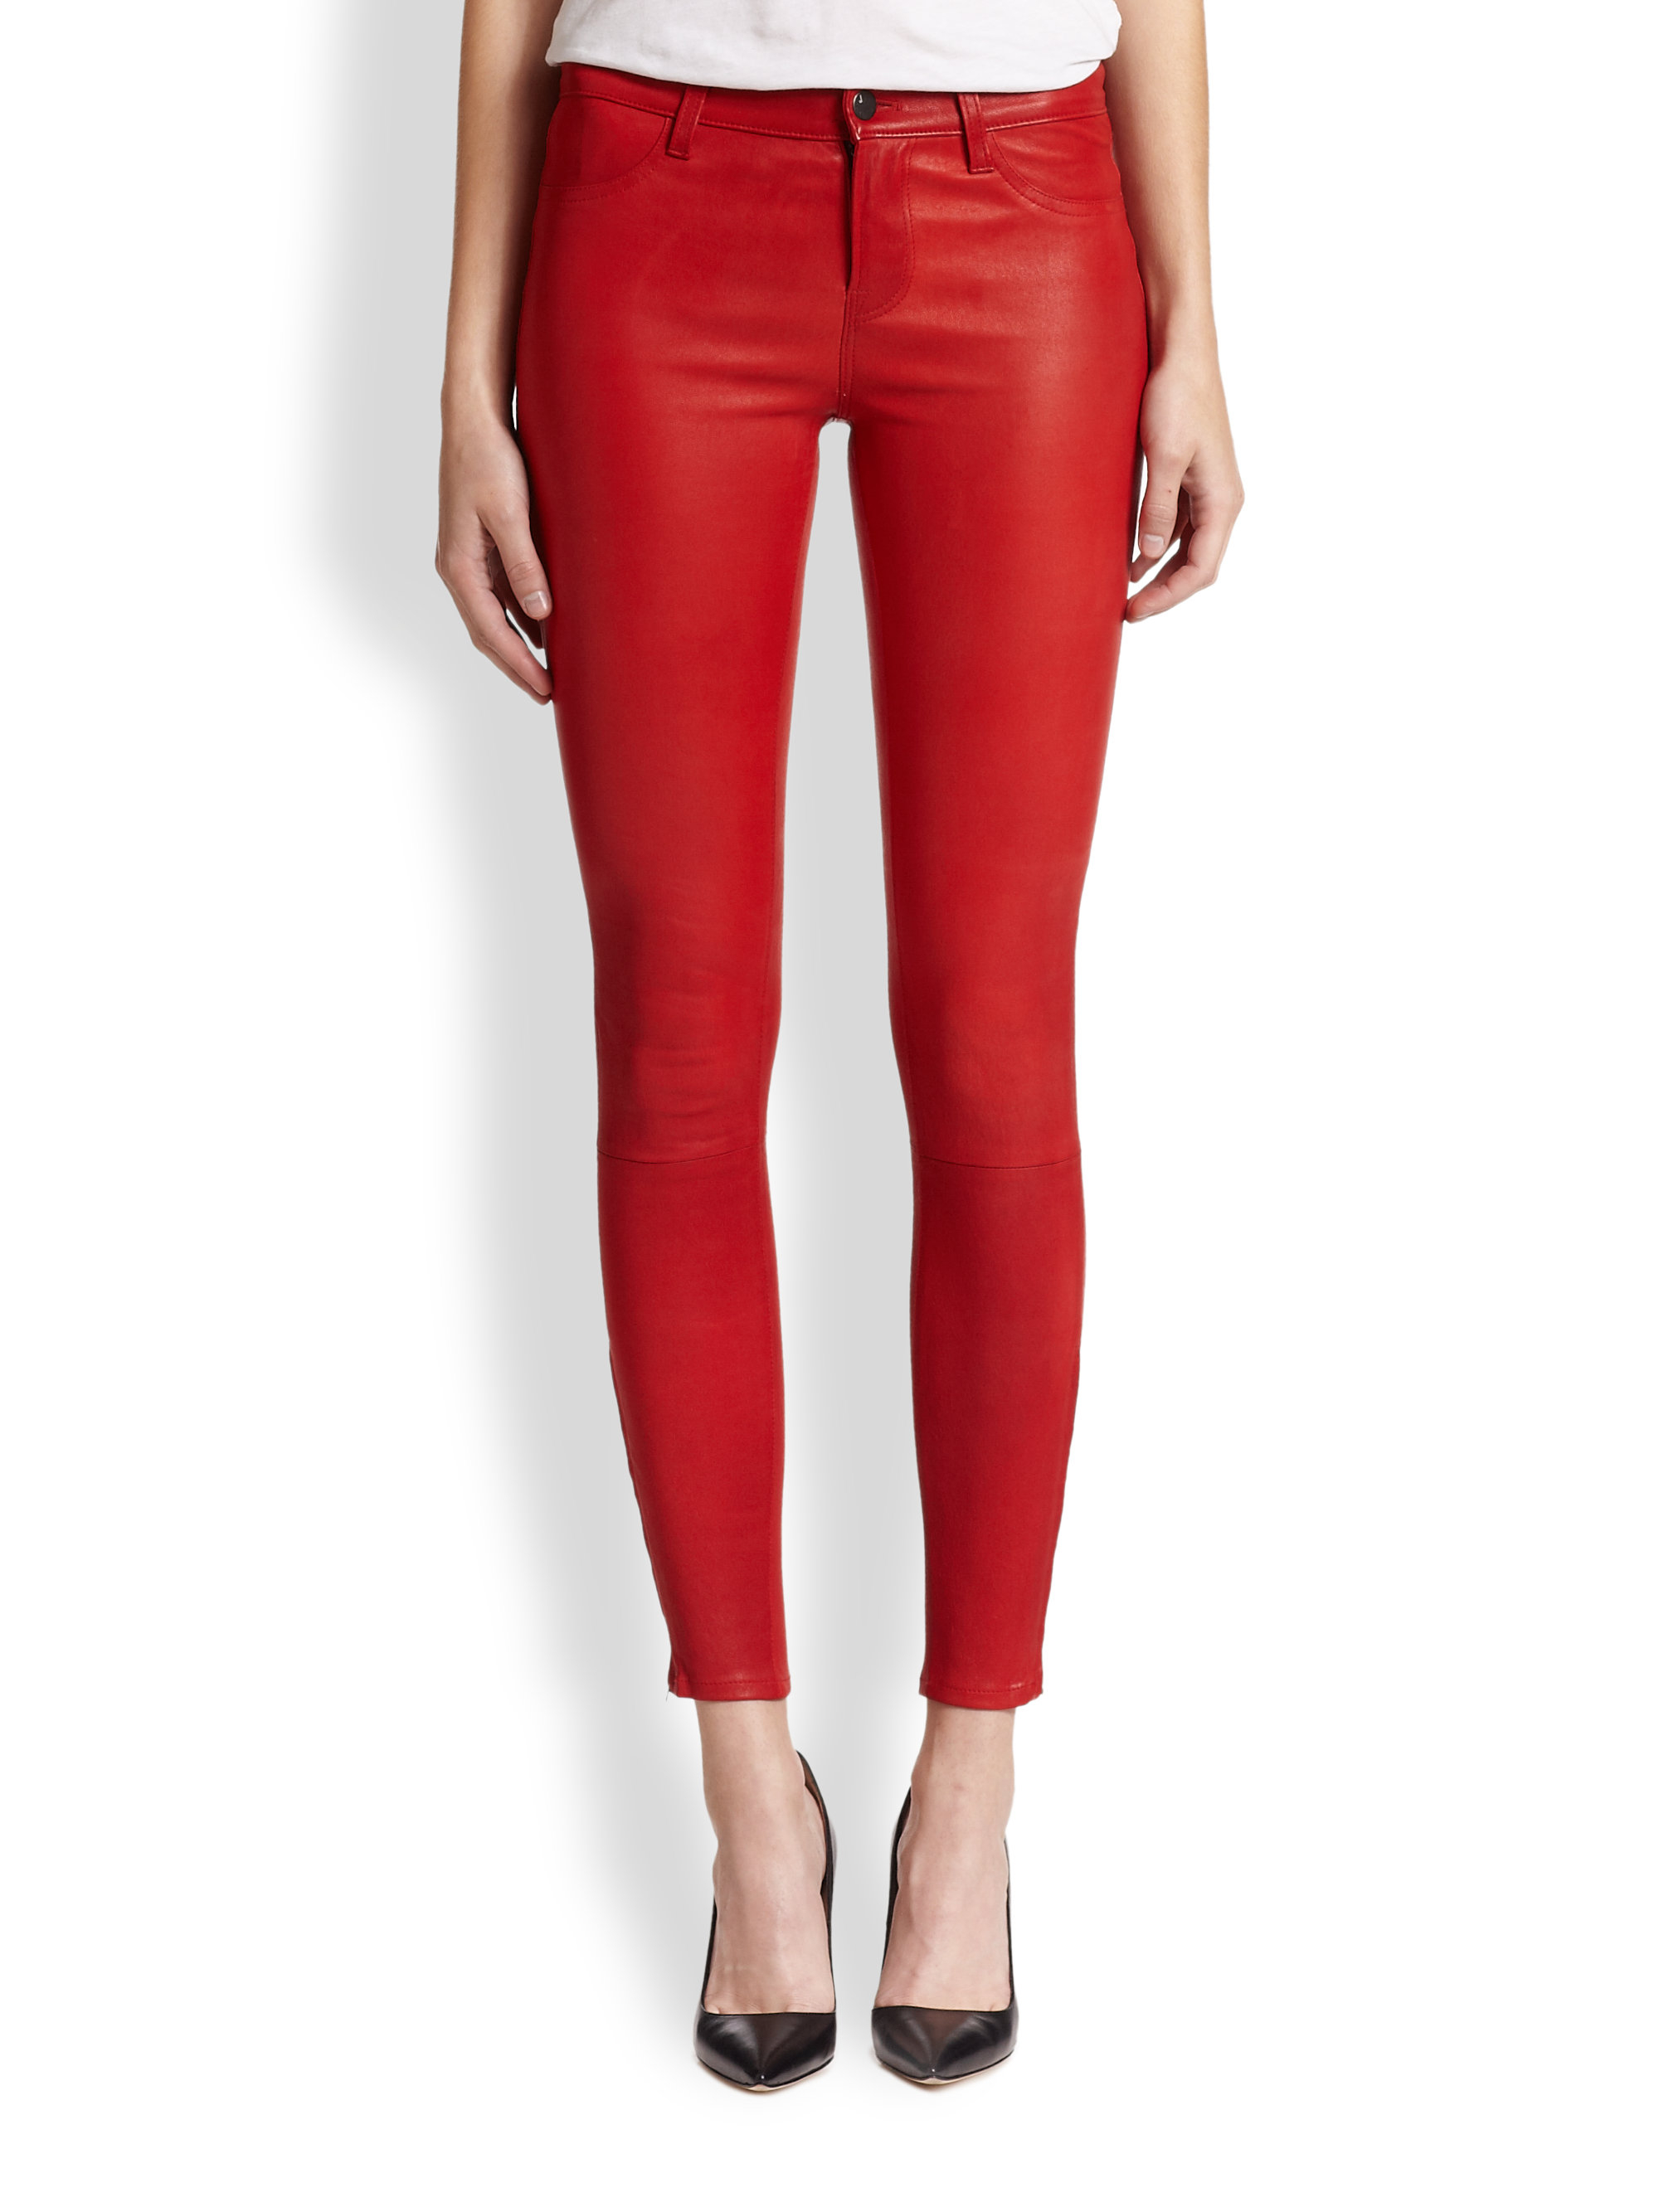 Lyst - J Brand Leather Skinny Jeans in Red